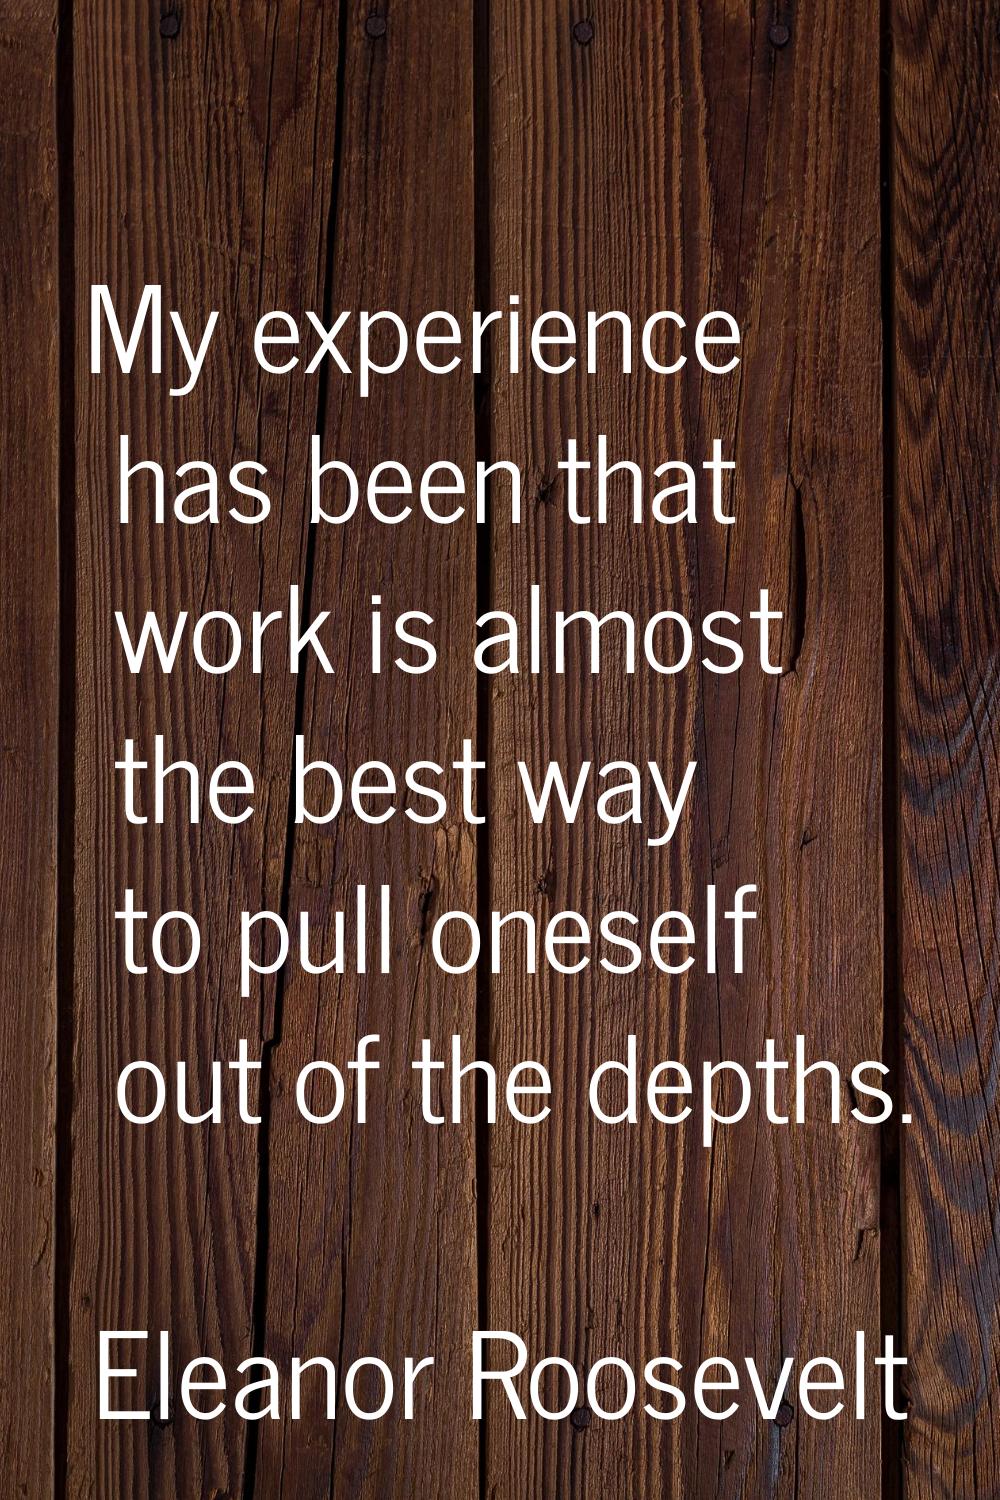 My experience has been that work is almost the best way to pull oneself out of the depths.